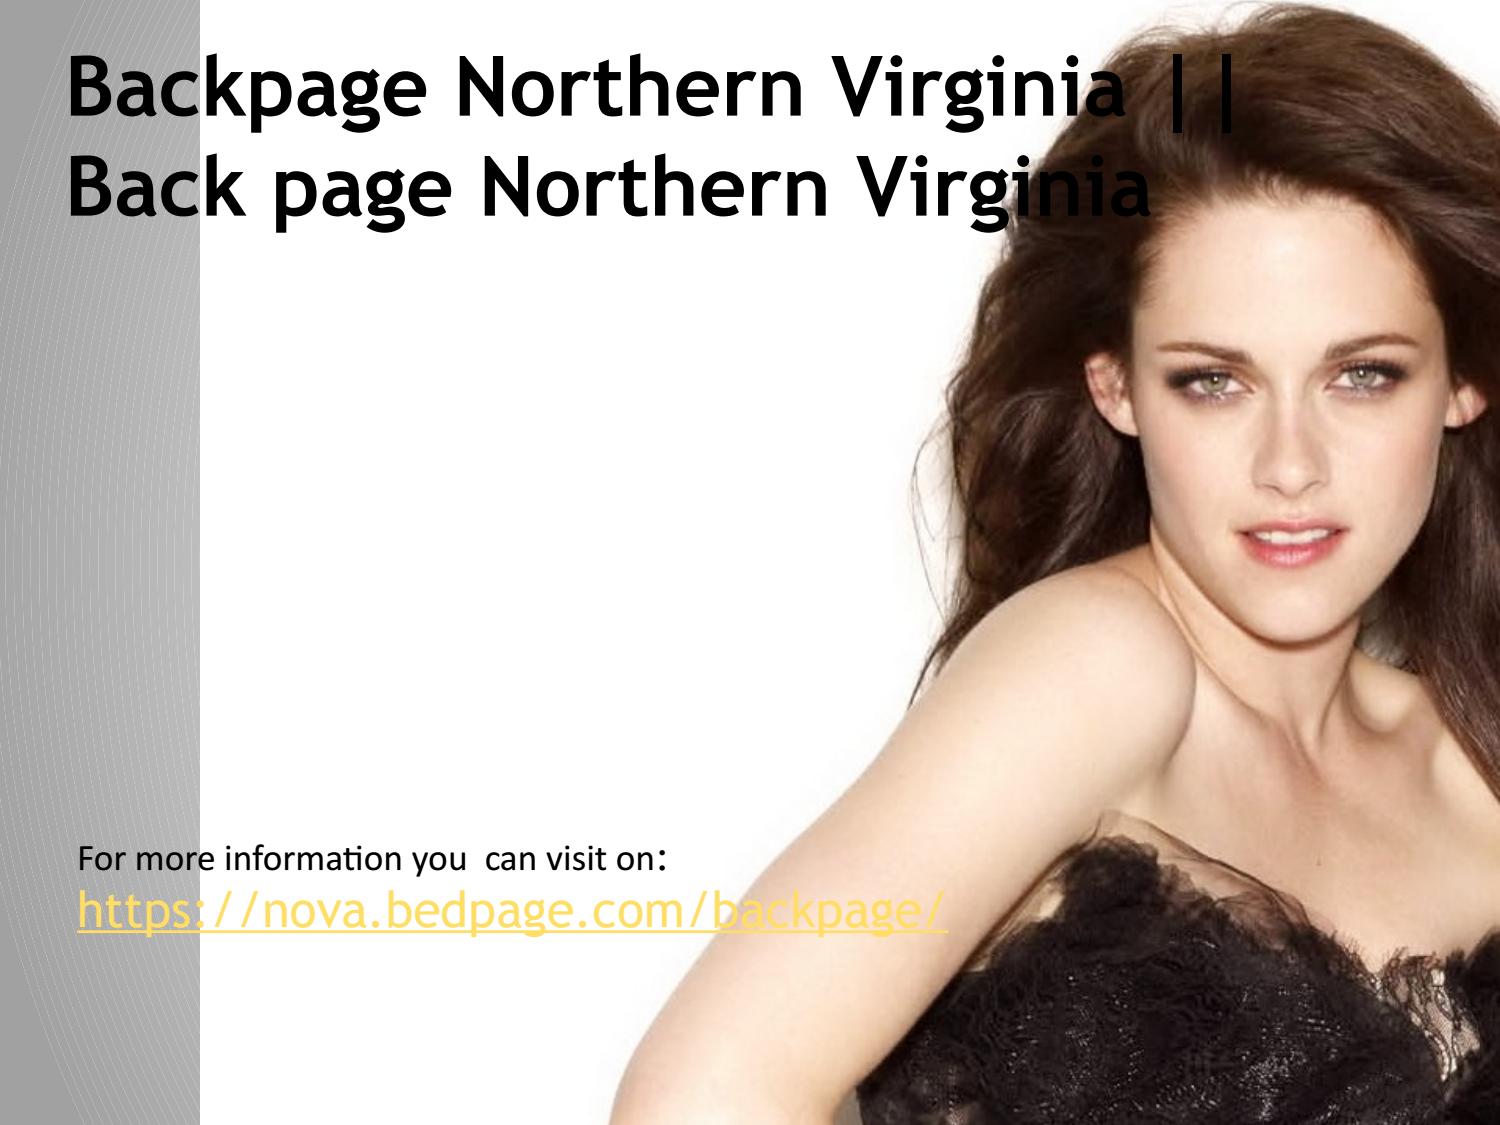 carol ann hughes recommends Backpage Com Northern Virginia